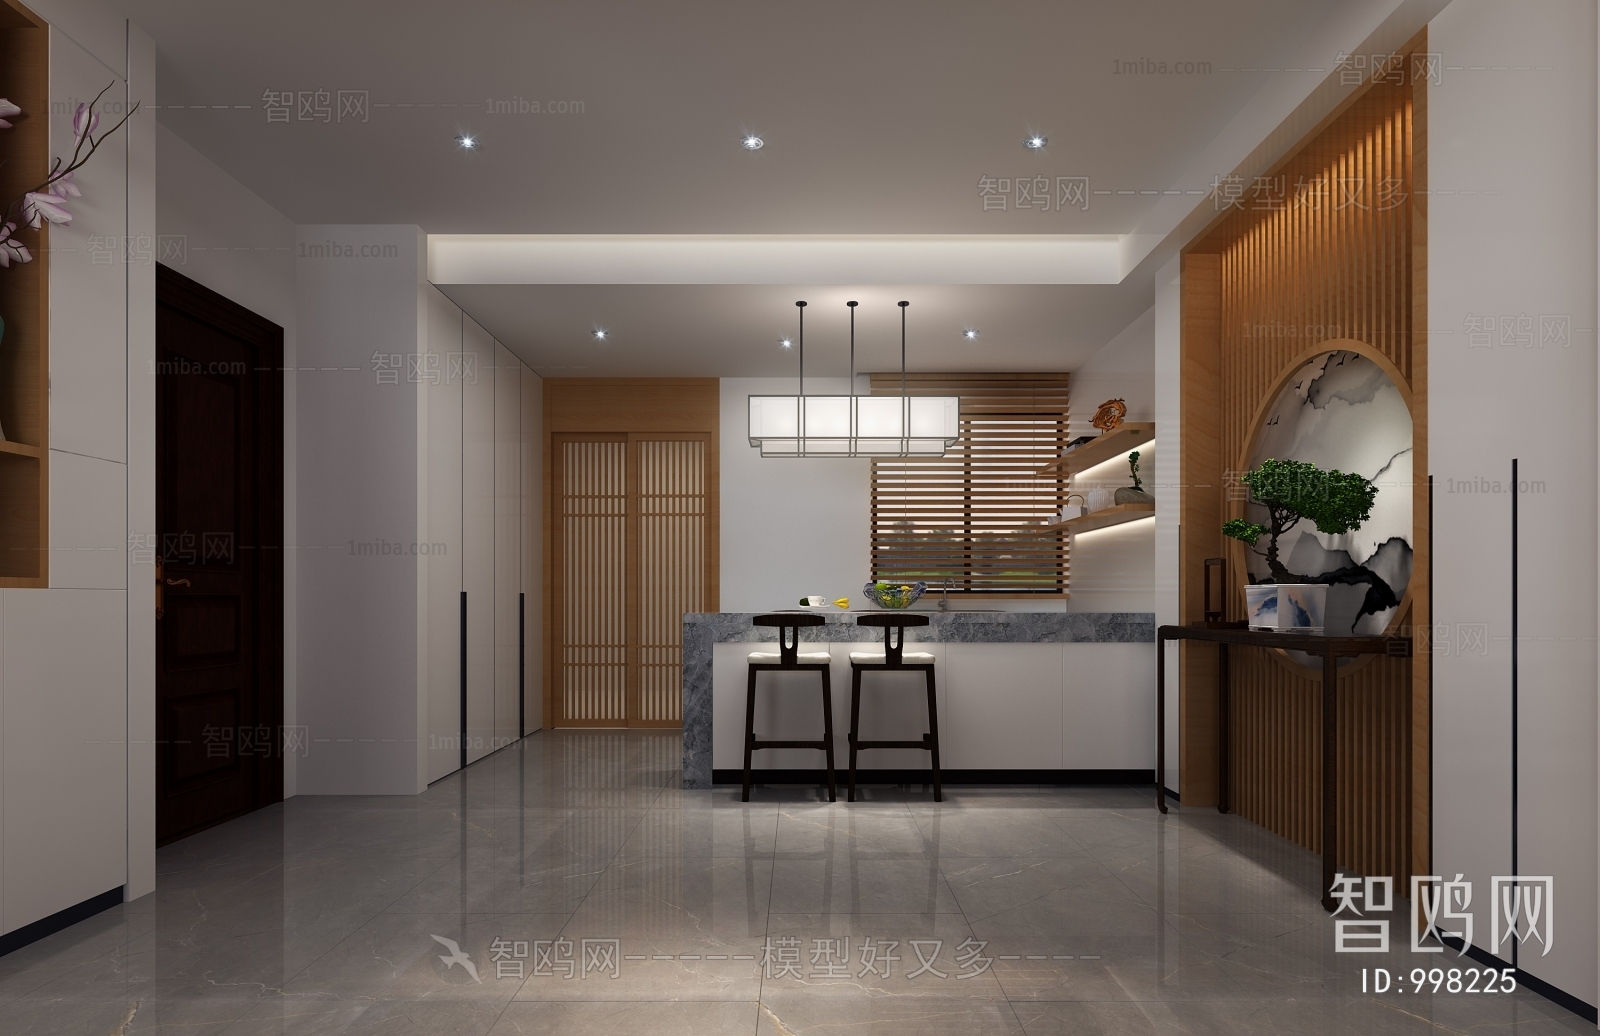 New Chinese Style Open Kitchen